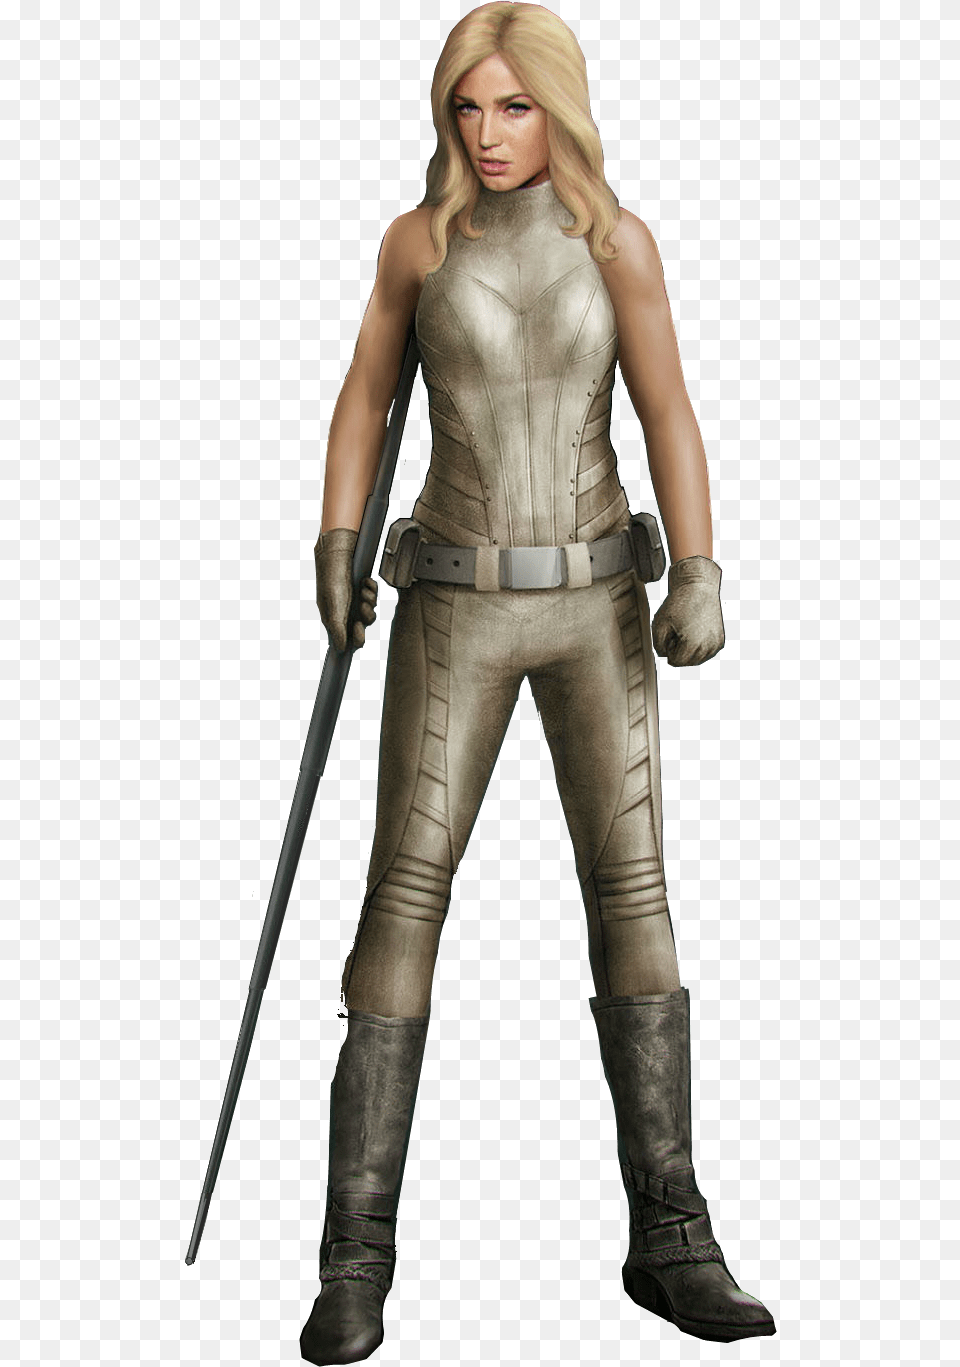 Canrio Branco White Canary Concept Art, Clothing, Costume, Person, Adult Png